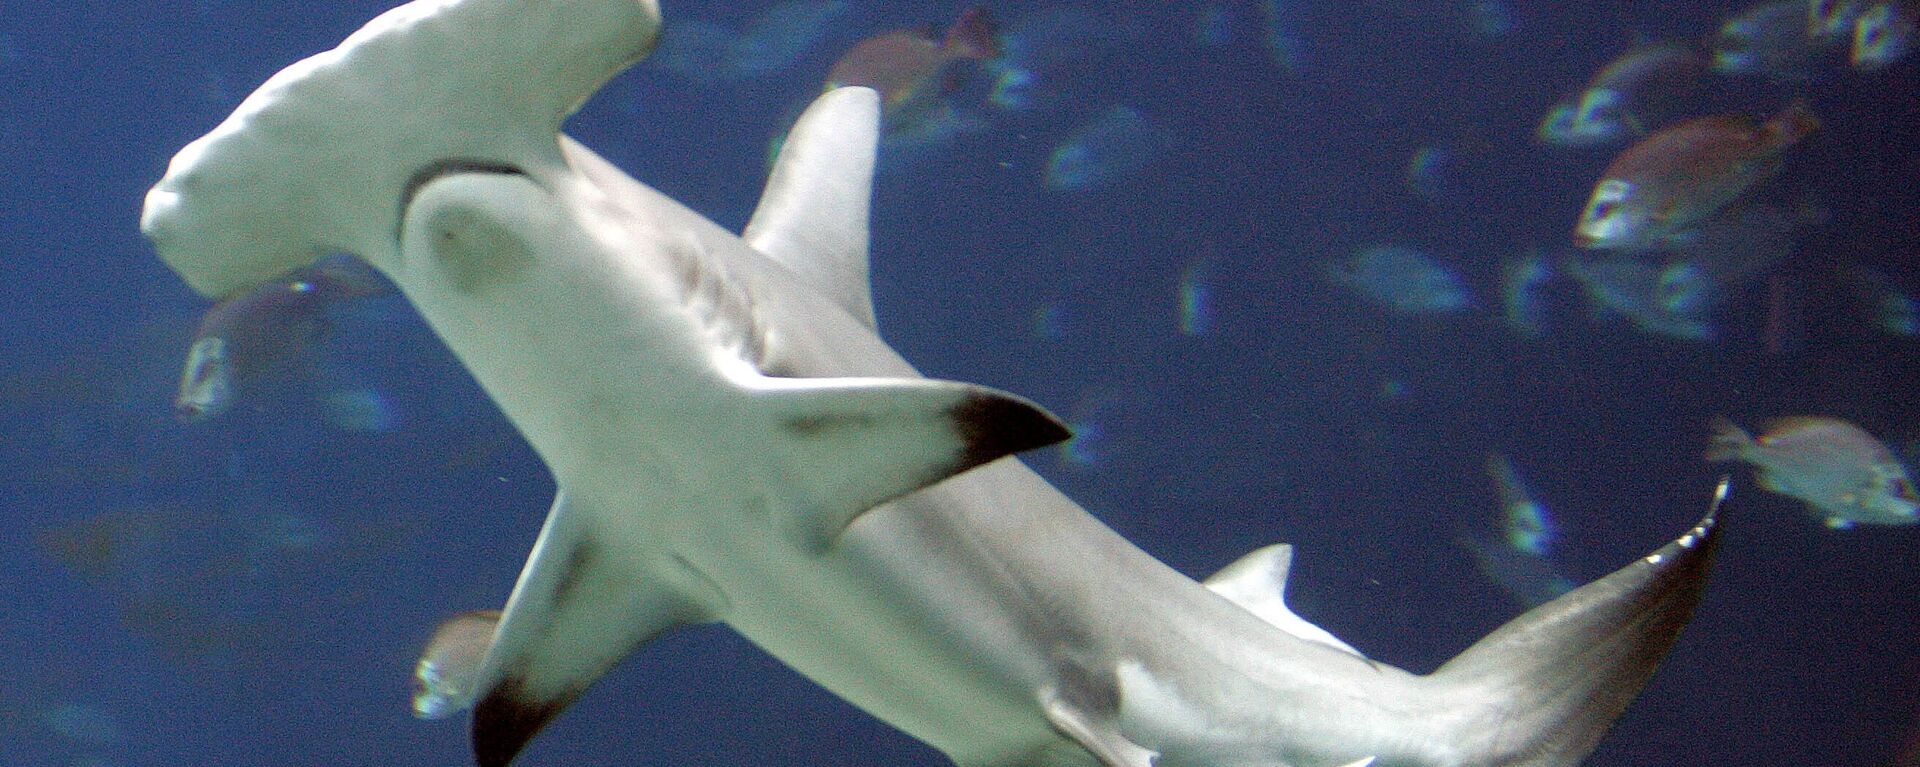 An Oct. 27, 2005 file photo shows a hammerhead shark in a large tank at the Georgia Aquarium, in Atlanta. A U.S.-backed proposal to protect the heavily fished hammerhead sharks was narrowly rejected Tuesday, March 23, 2010, over concerns by Asia nations that regulating the booming trade in shark fins could hurt poor nations.   - Sputnik International, 1920, 16.06.2023